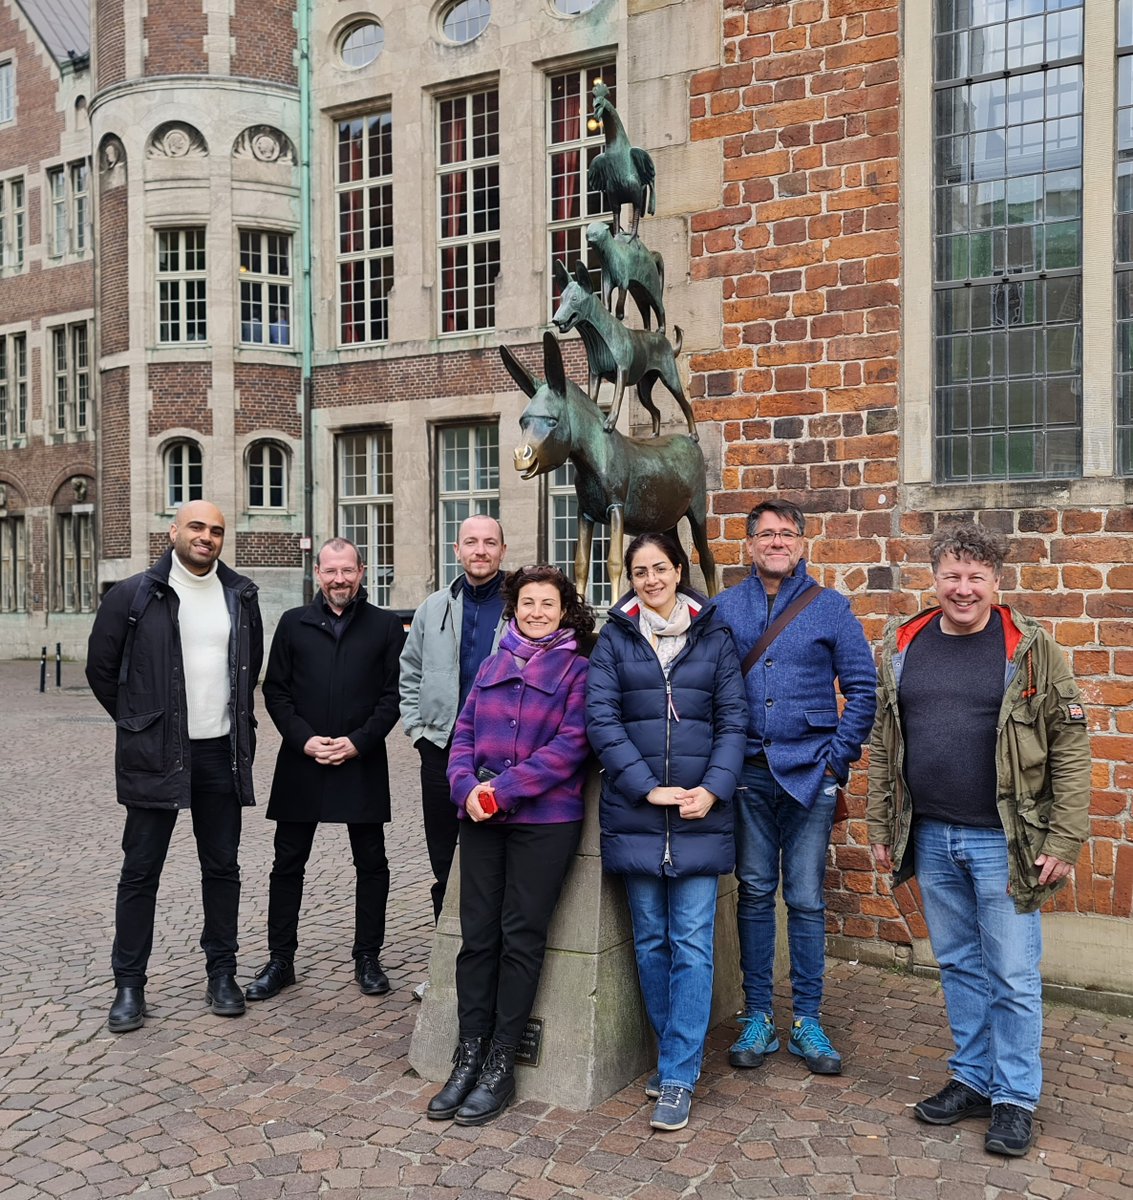 Kick-Off Workshop in #Bremen on April, 25th of our #DFG-funded project #OneSecure within the #SPP2253: #NanoSecurity: From Nano-Electronics to Secure Systems gepris.dfg.de/gepris/projekt… @agra_uni_bremen @SstuParstu @dfg_public #security @DFKI @DSC_unibremen